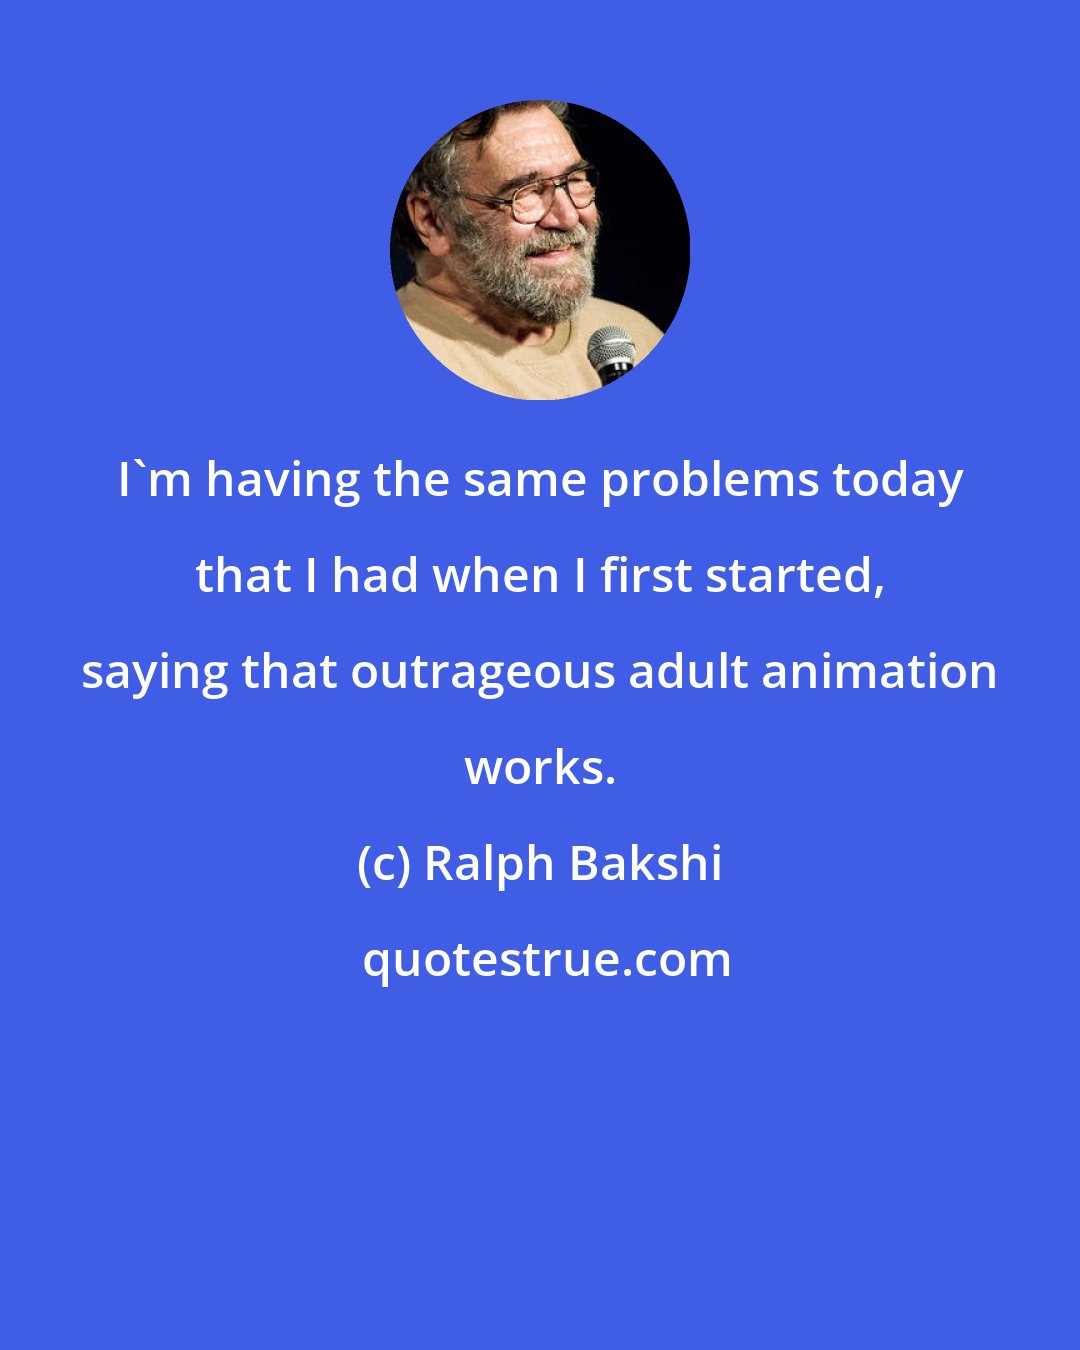 Ralph Bakshi: I'm having the same problems today that I had when I first started, saying that outrageous adult animation works.